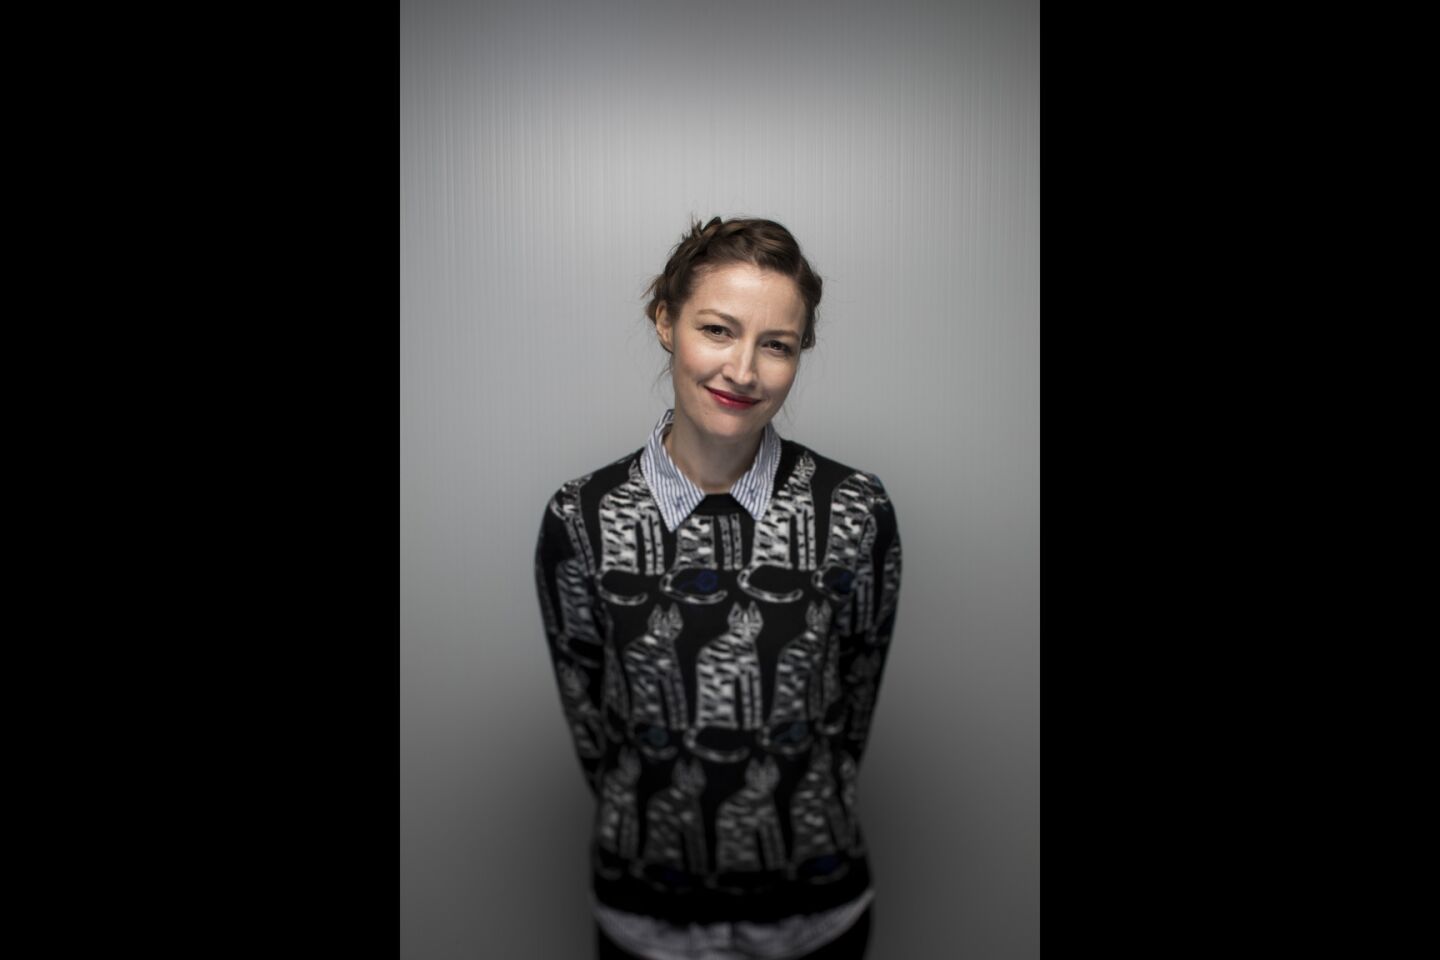 Actress Kelly Macdonald, from the film "Puzzle."